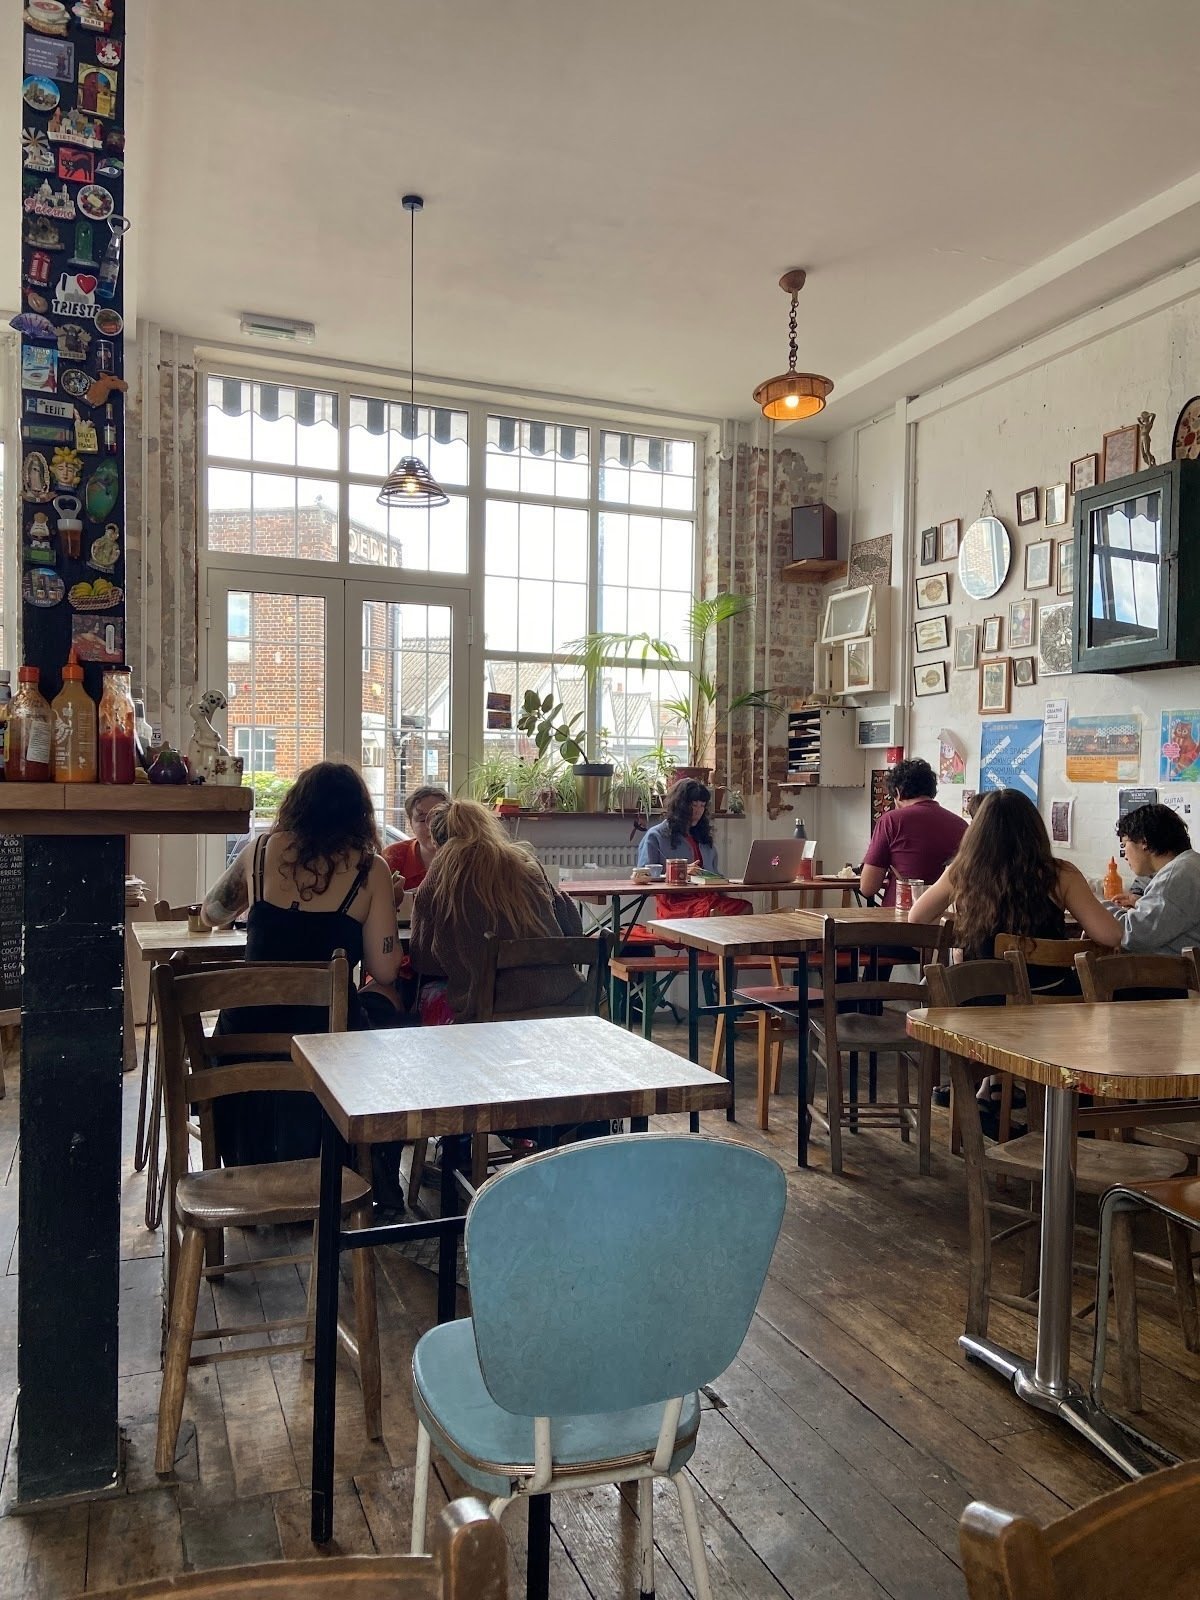 <span class="translation_missing" title="translation missing: en.meta.location_title, location_name: Venus Cafe and Social House, city: London">Location Title</span>